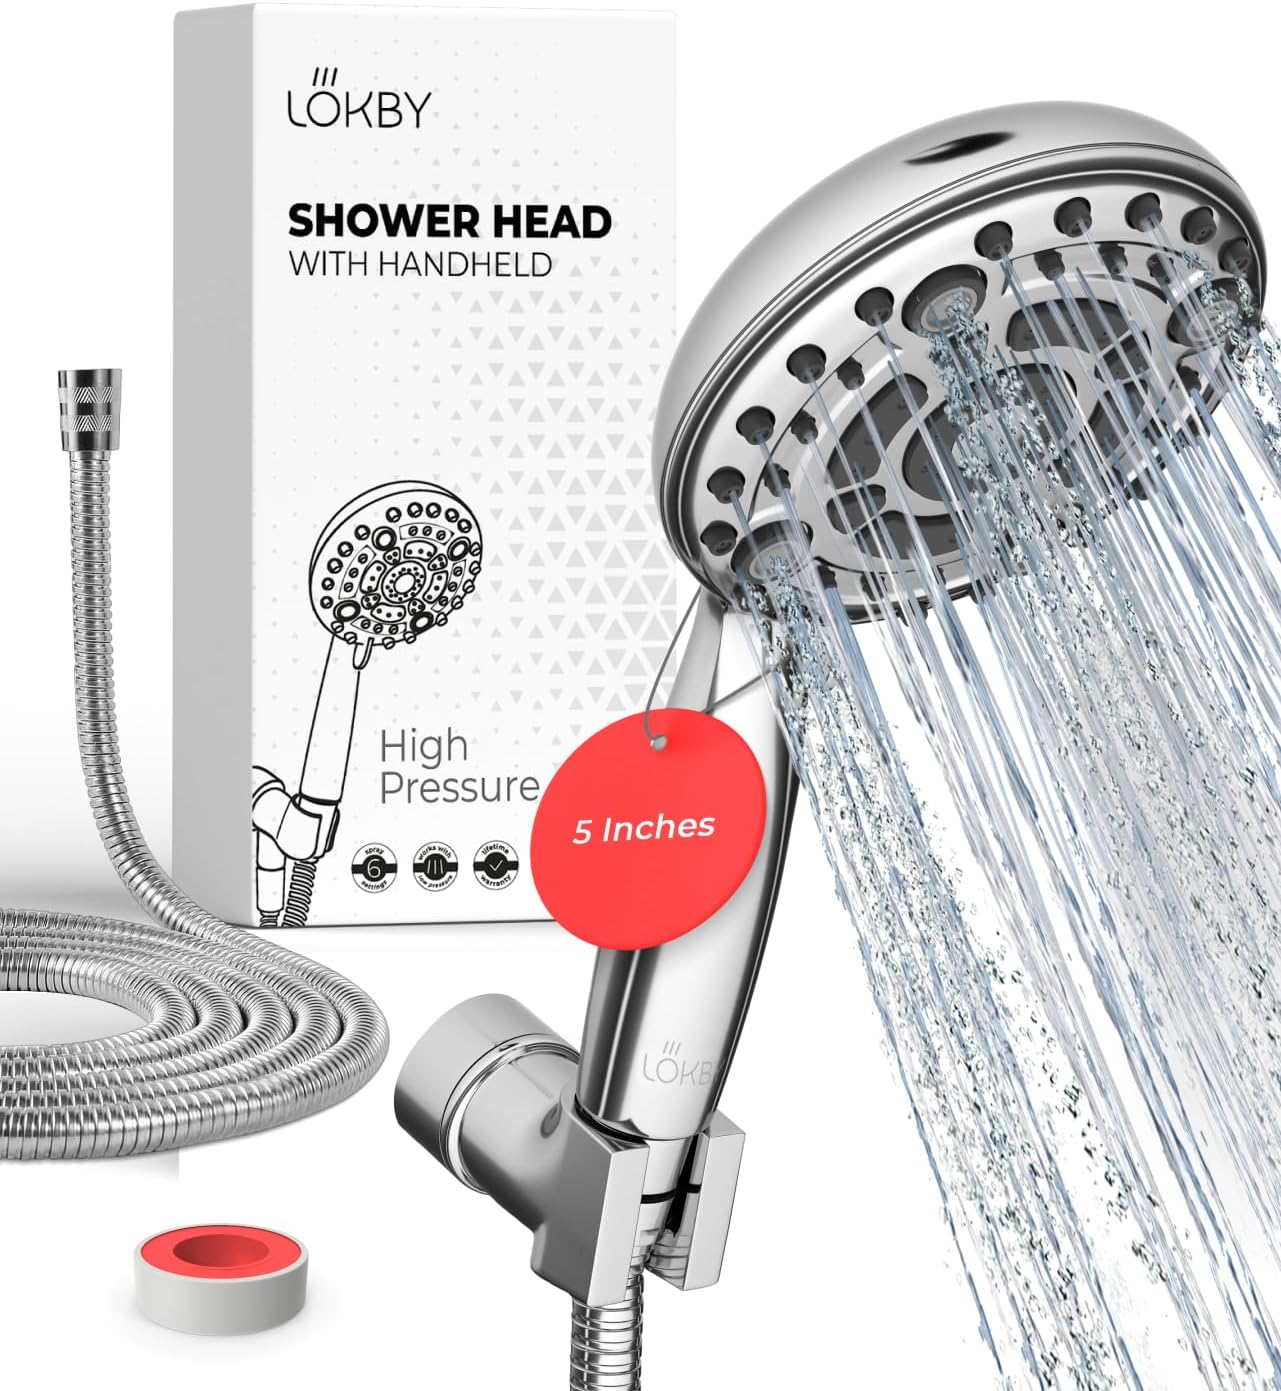 LOKBY - CSA US Tested & Certified - High Pressure Shower Head with Handheld - Water Saving Detachable Rain Shower Head Set - 6-Mode with Removable Hand Held and 59 Hose, 1-Min No Tool Install, Chrome